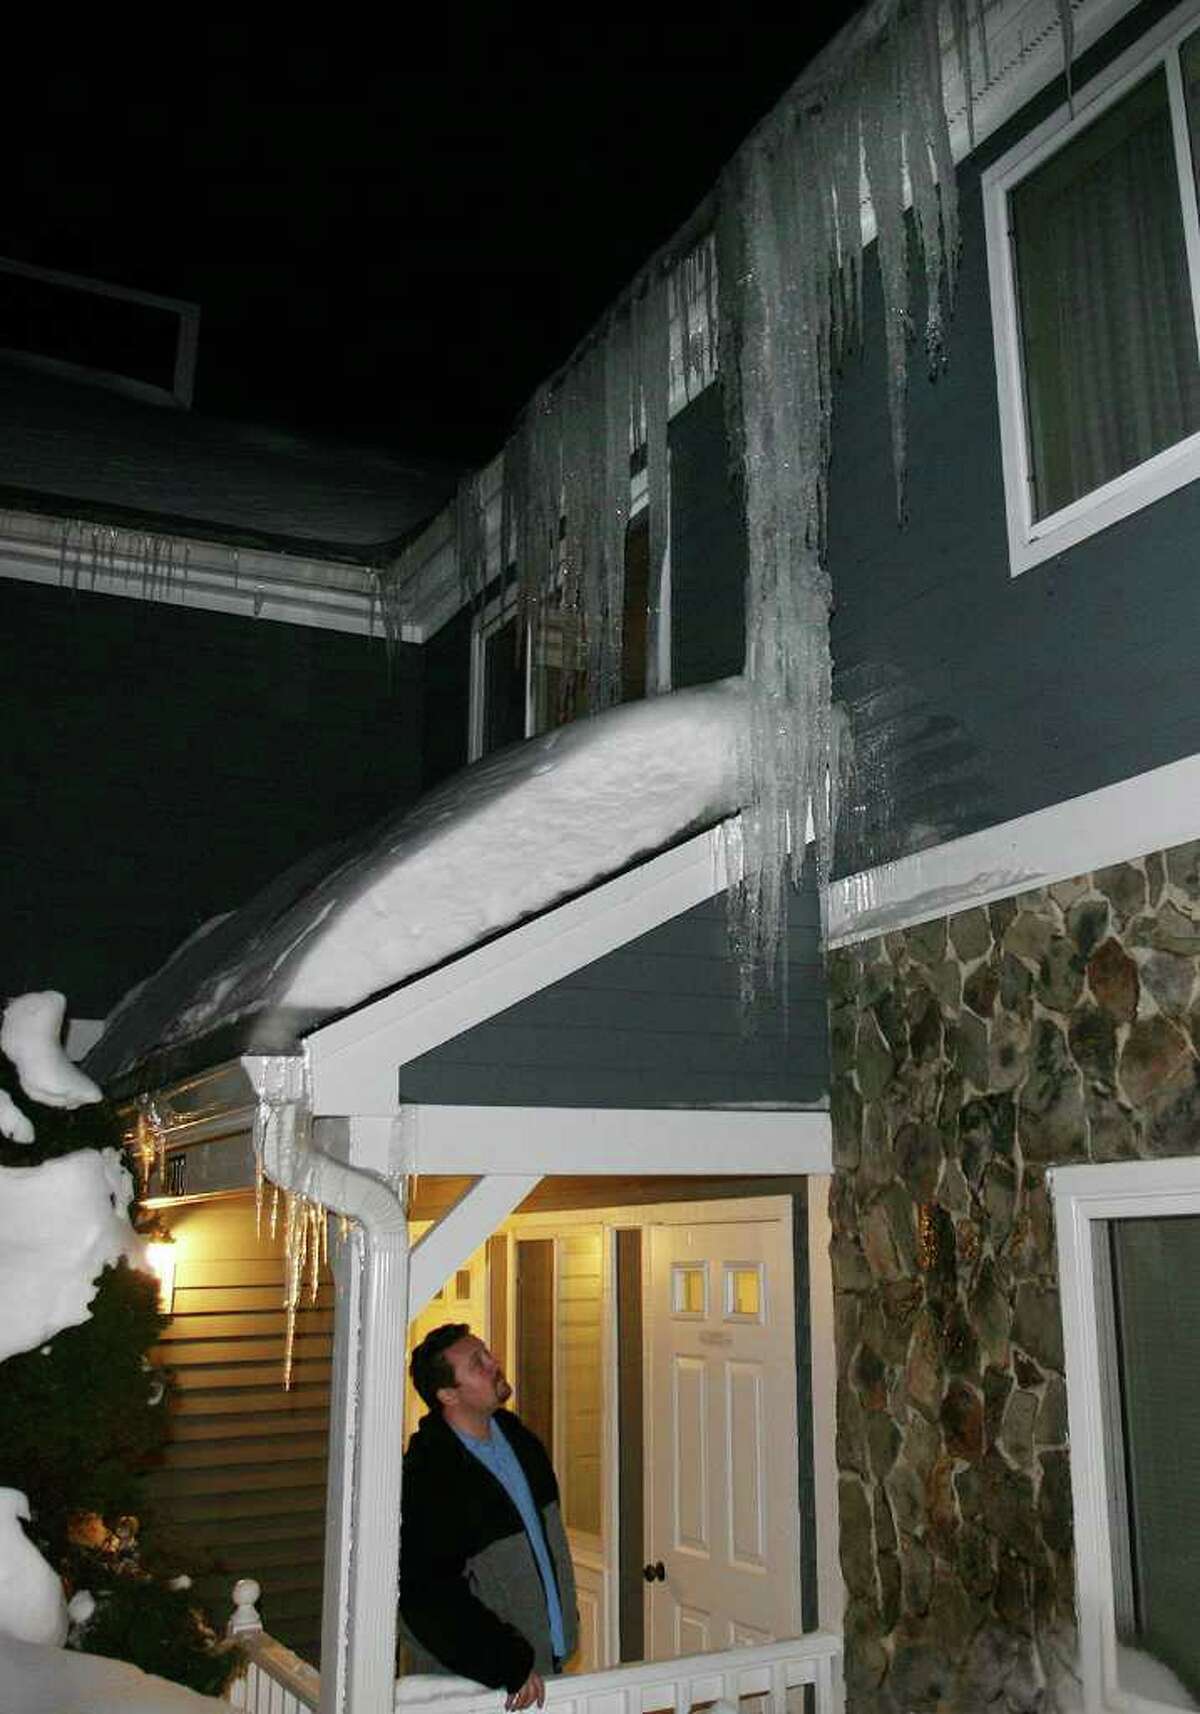 J.P. Sredzinski of Monroe looks at giant icicles hanging from gutters blocked with ice outside his condo in the Hills of Monroe complex on Monday, January 17, 2011.